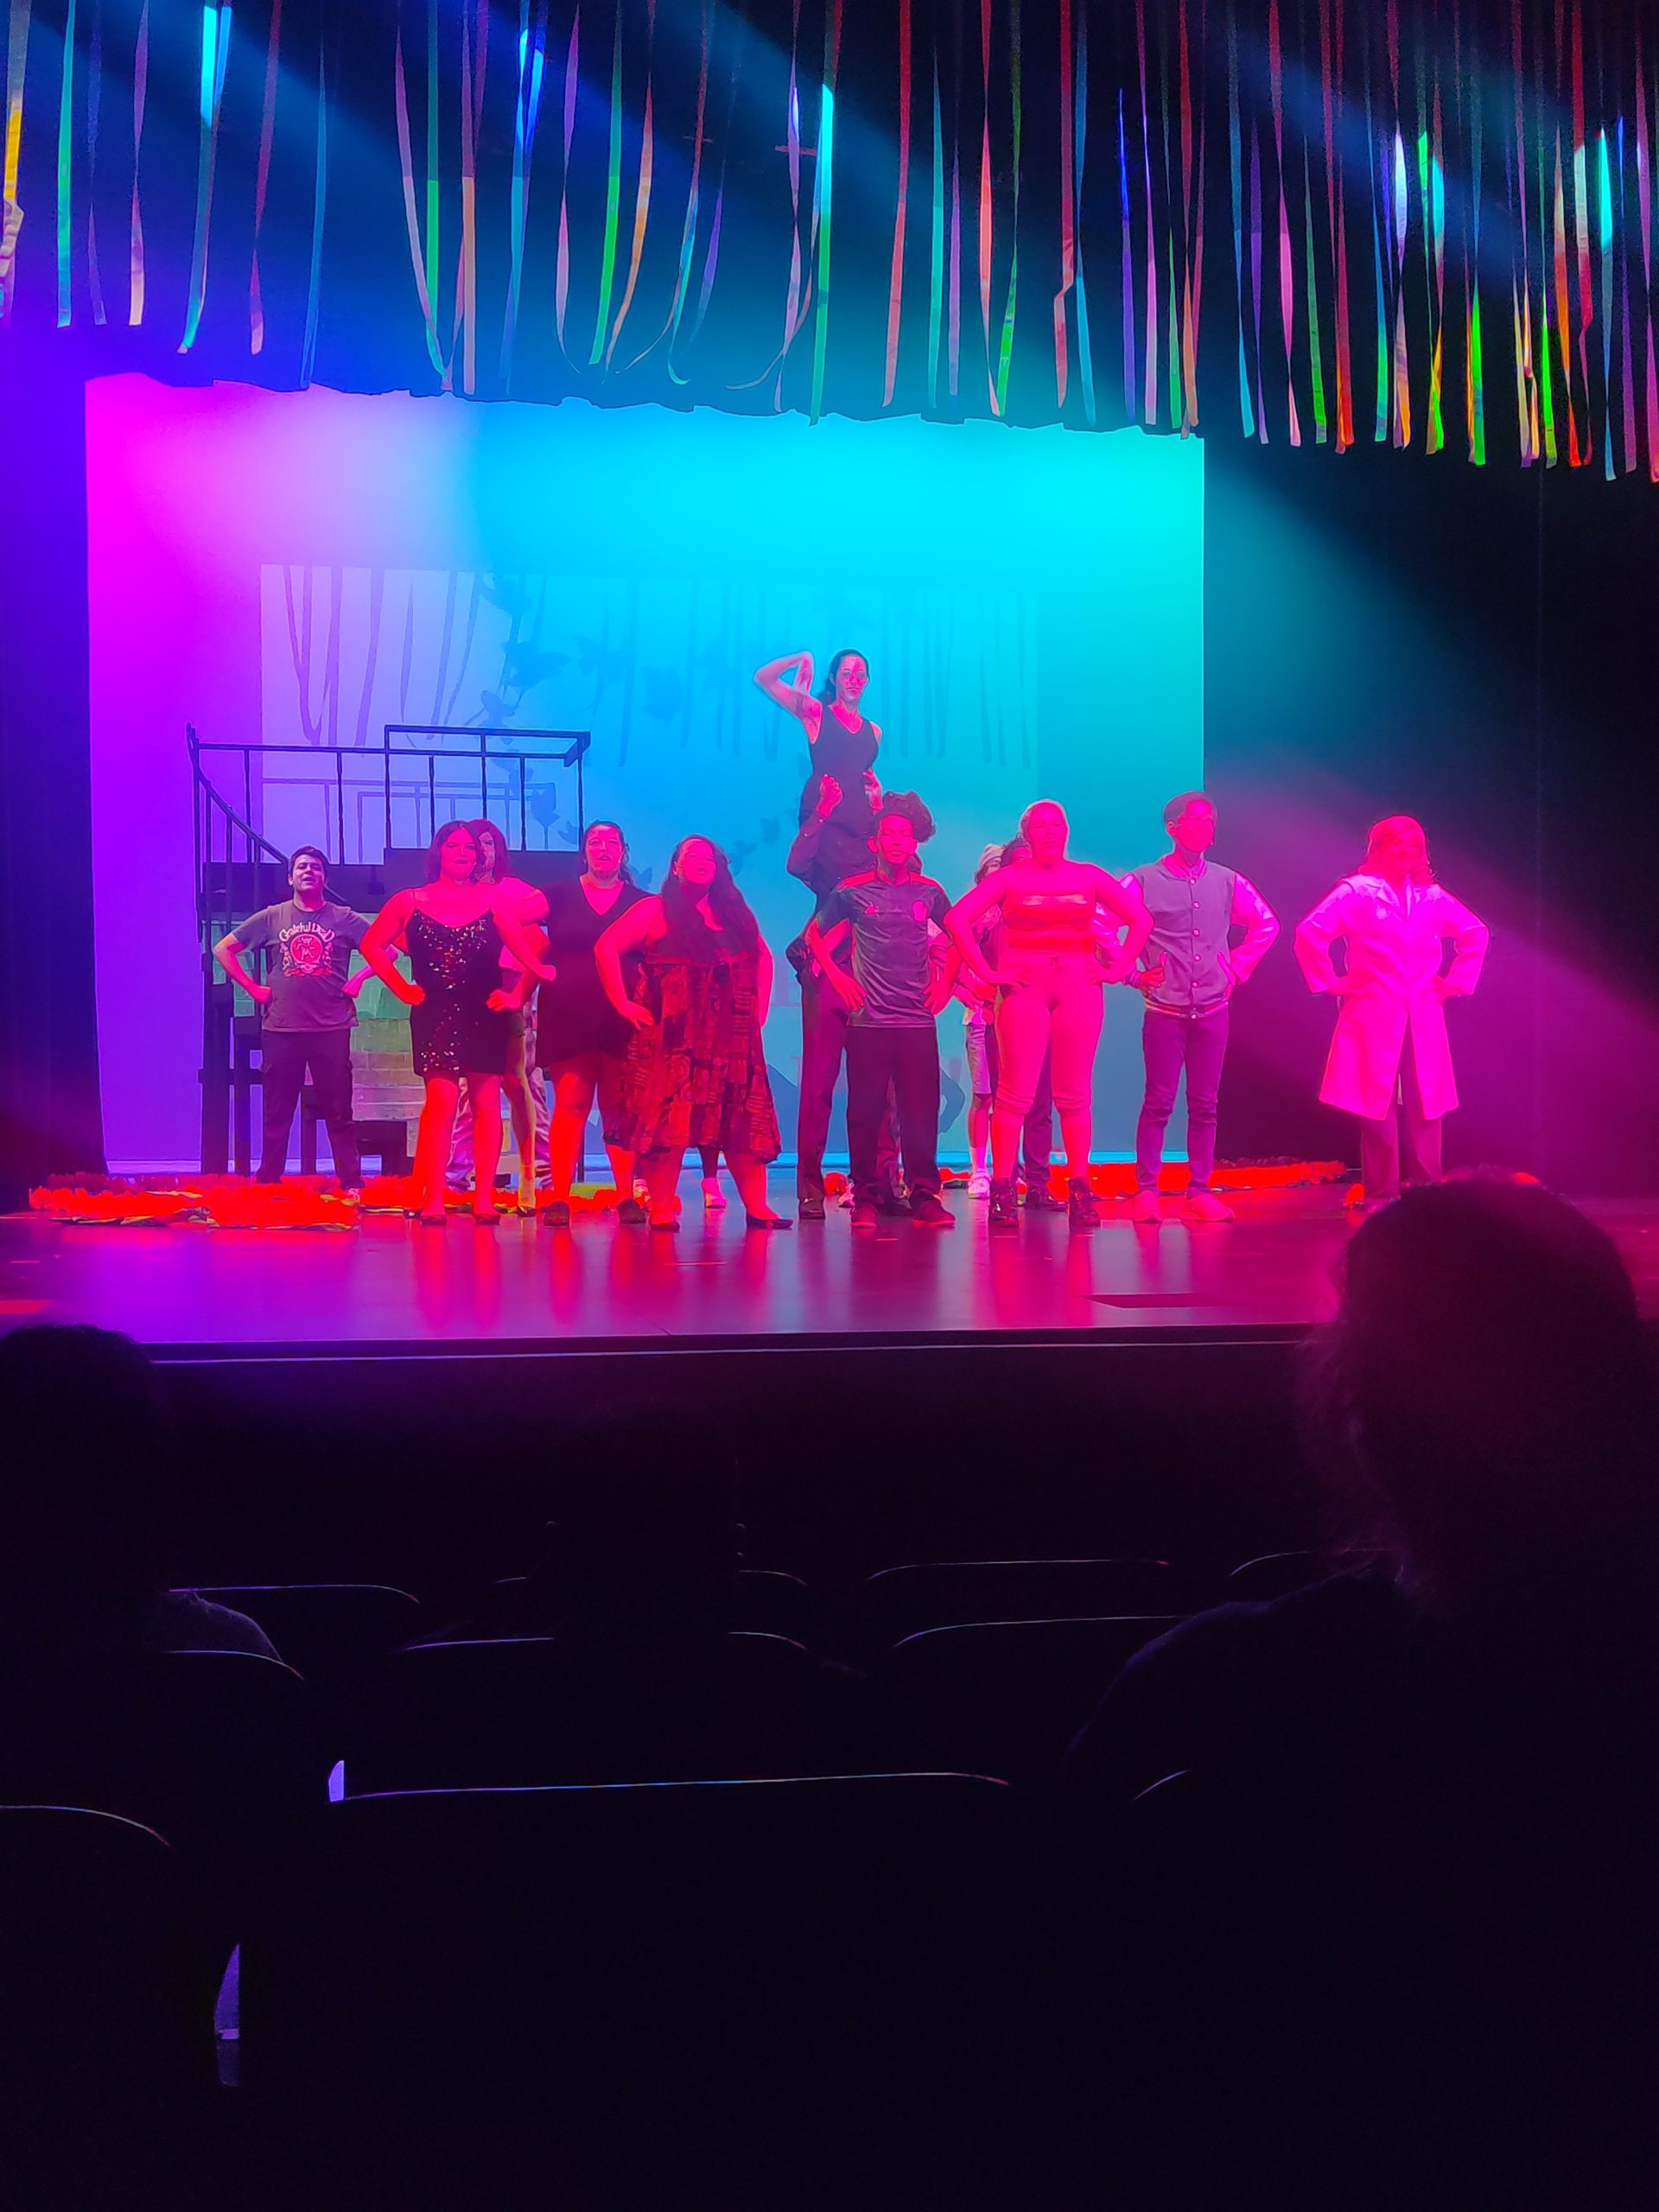 “I heart immigrants!” theater show at SJCC on May 11 showcased immigrants coming to America and different lives of immigrants and their journey into migration through musical numbers.